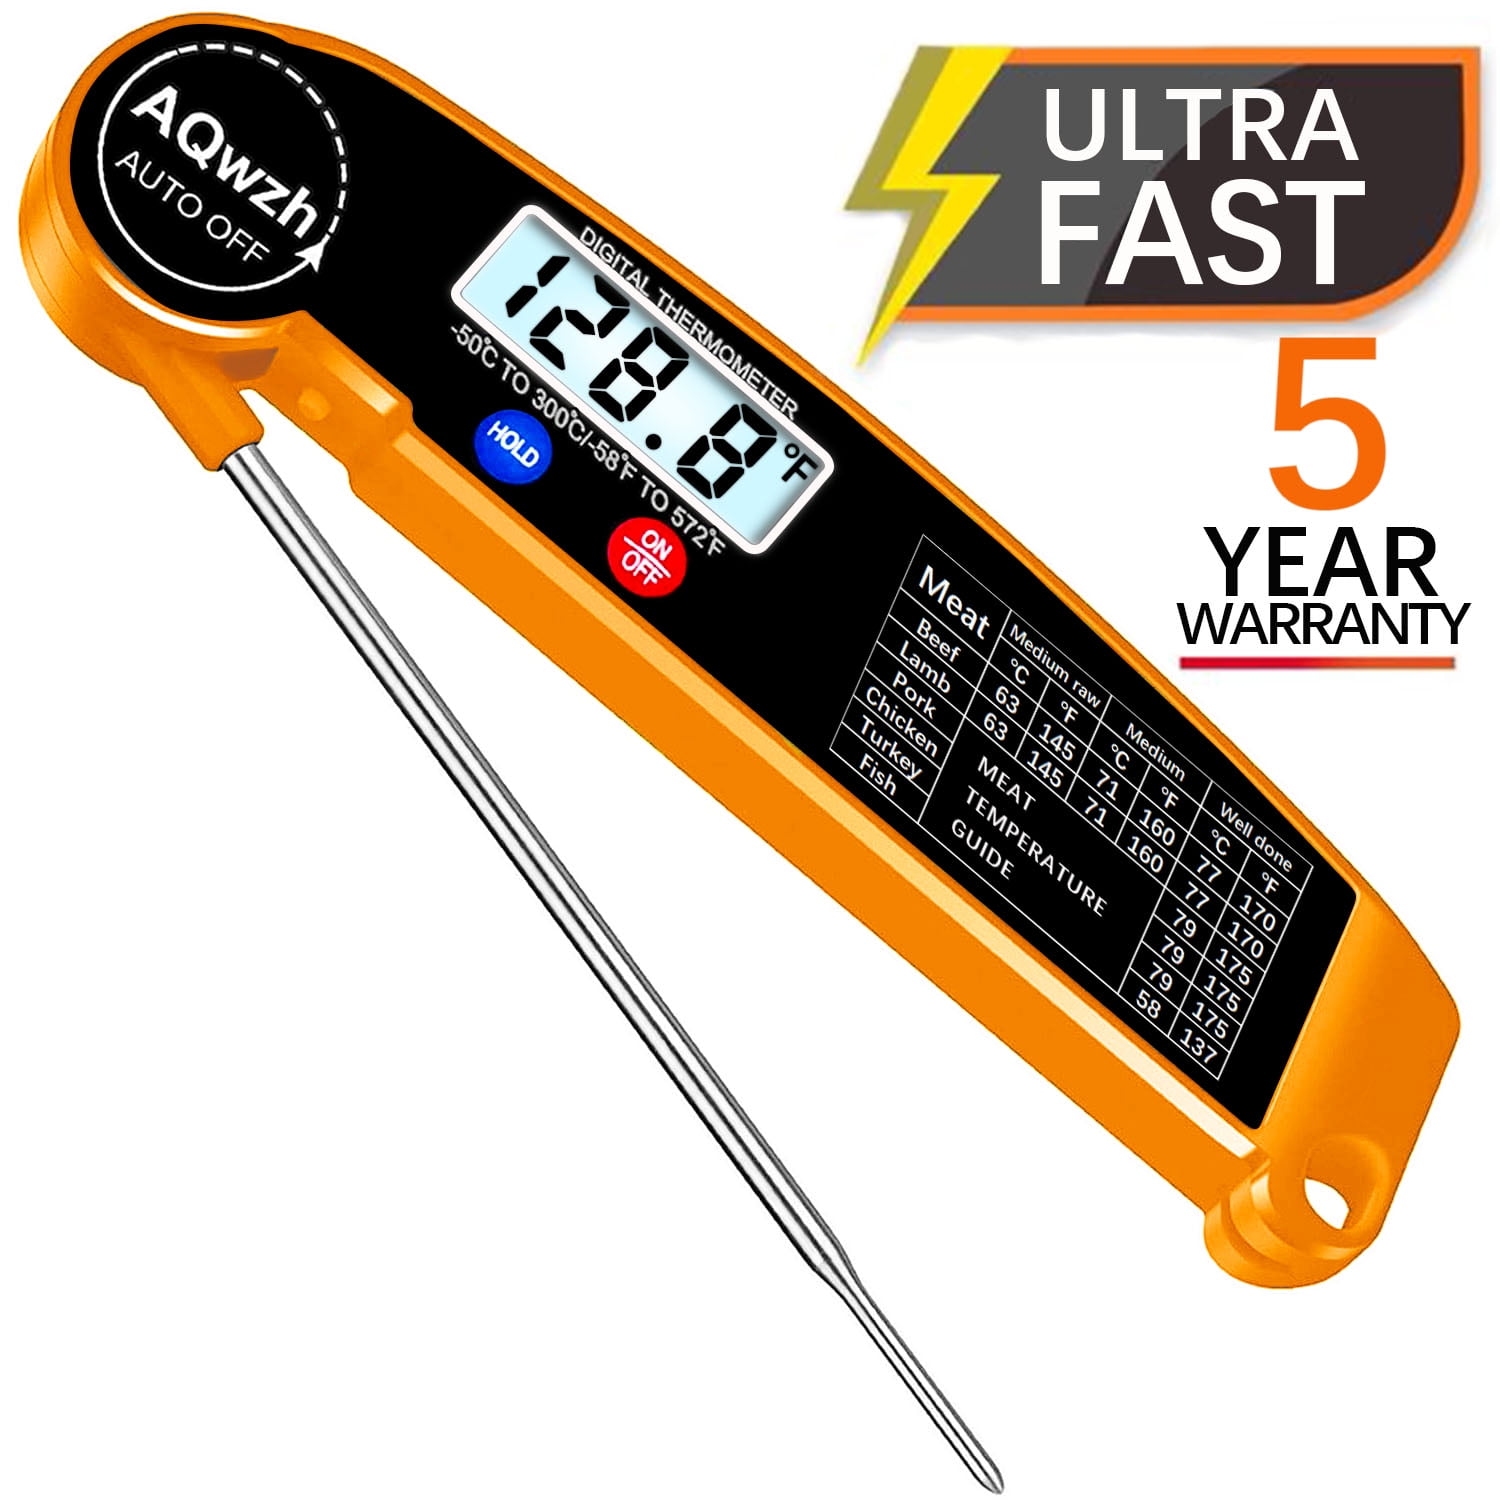 L'Chaim Meat Thermometer Oven Kitchen Digital Cooking Food – lchaimmeats